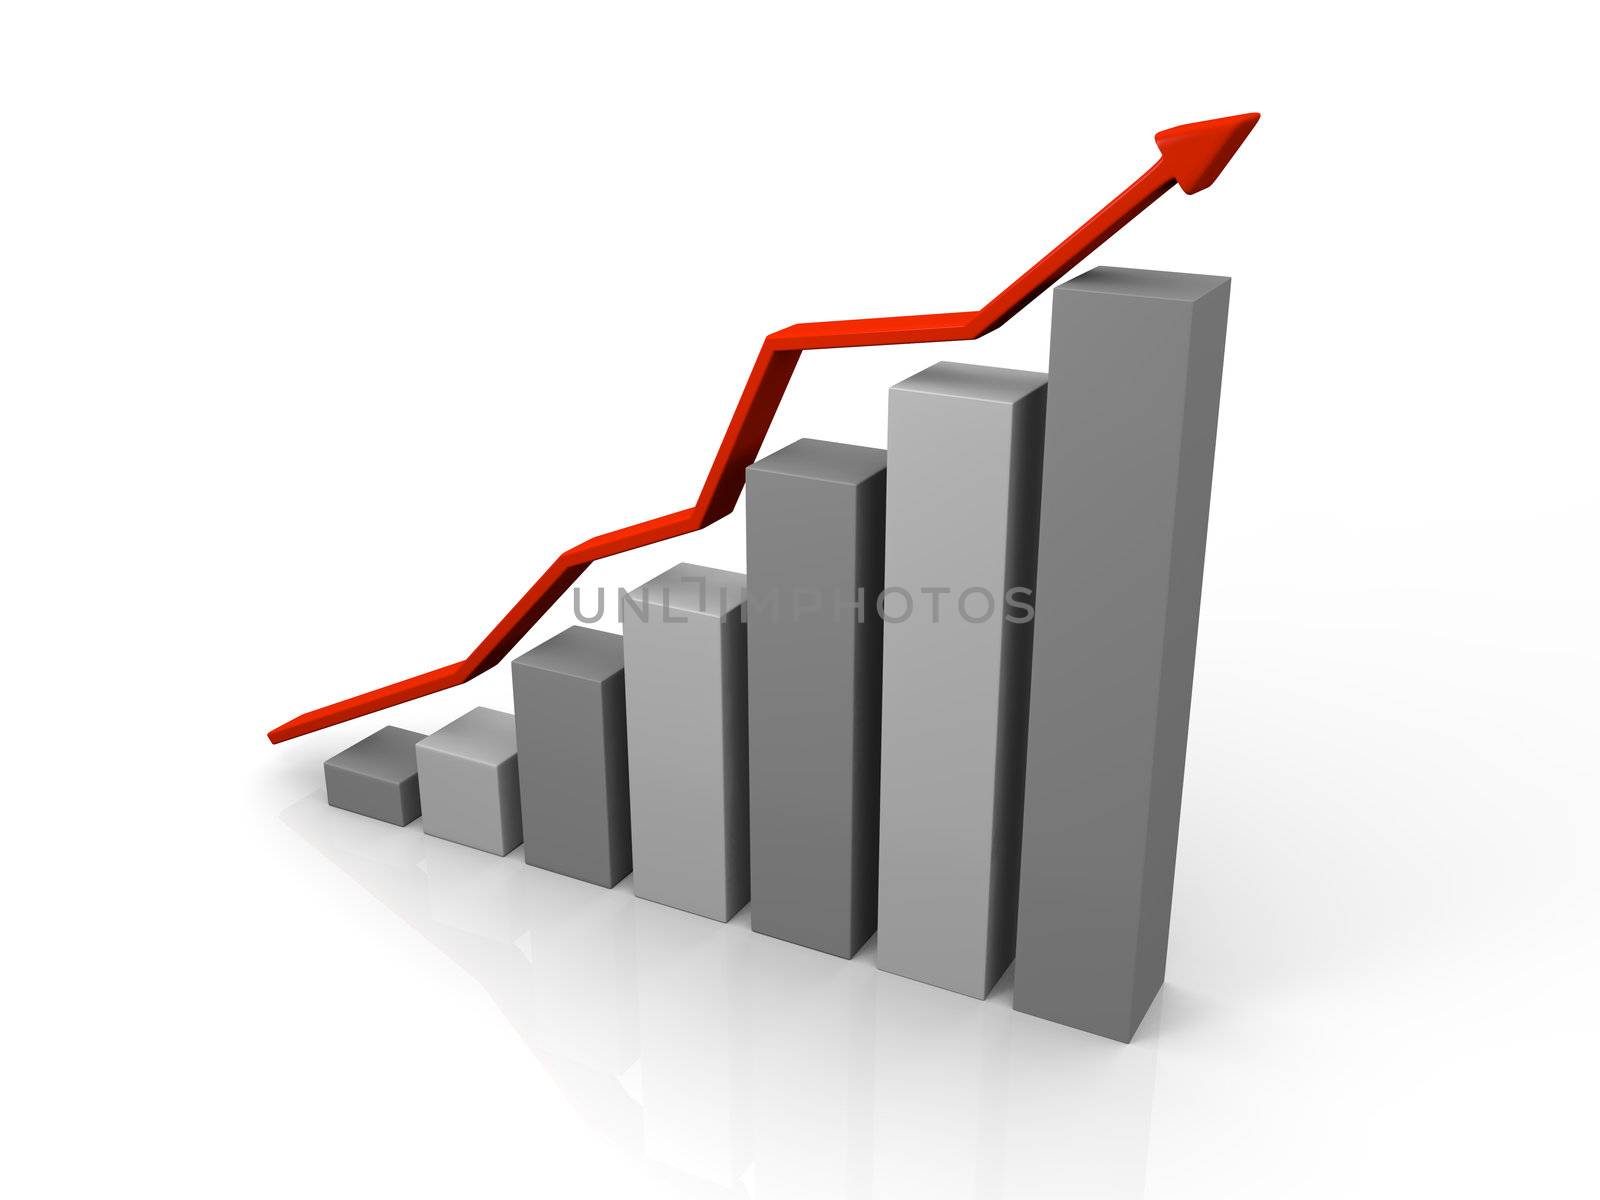 3D illustration of growth chart with red trend line